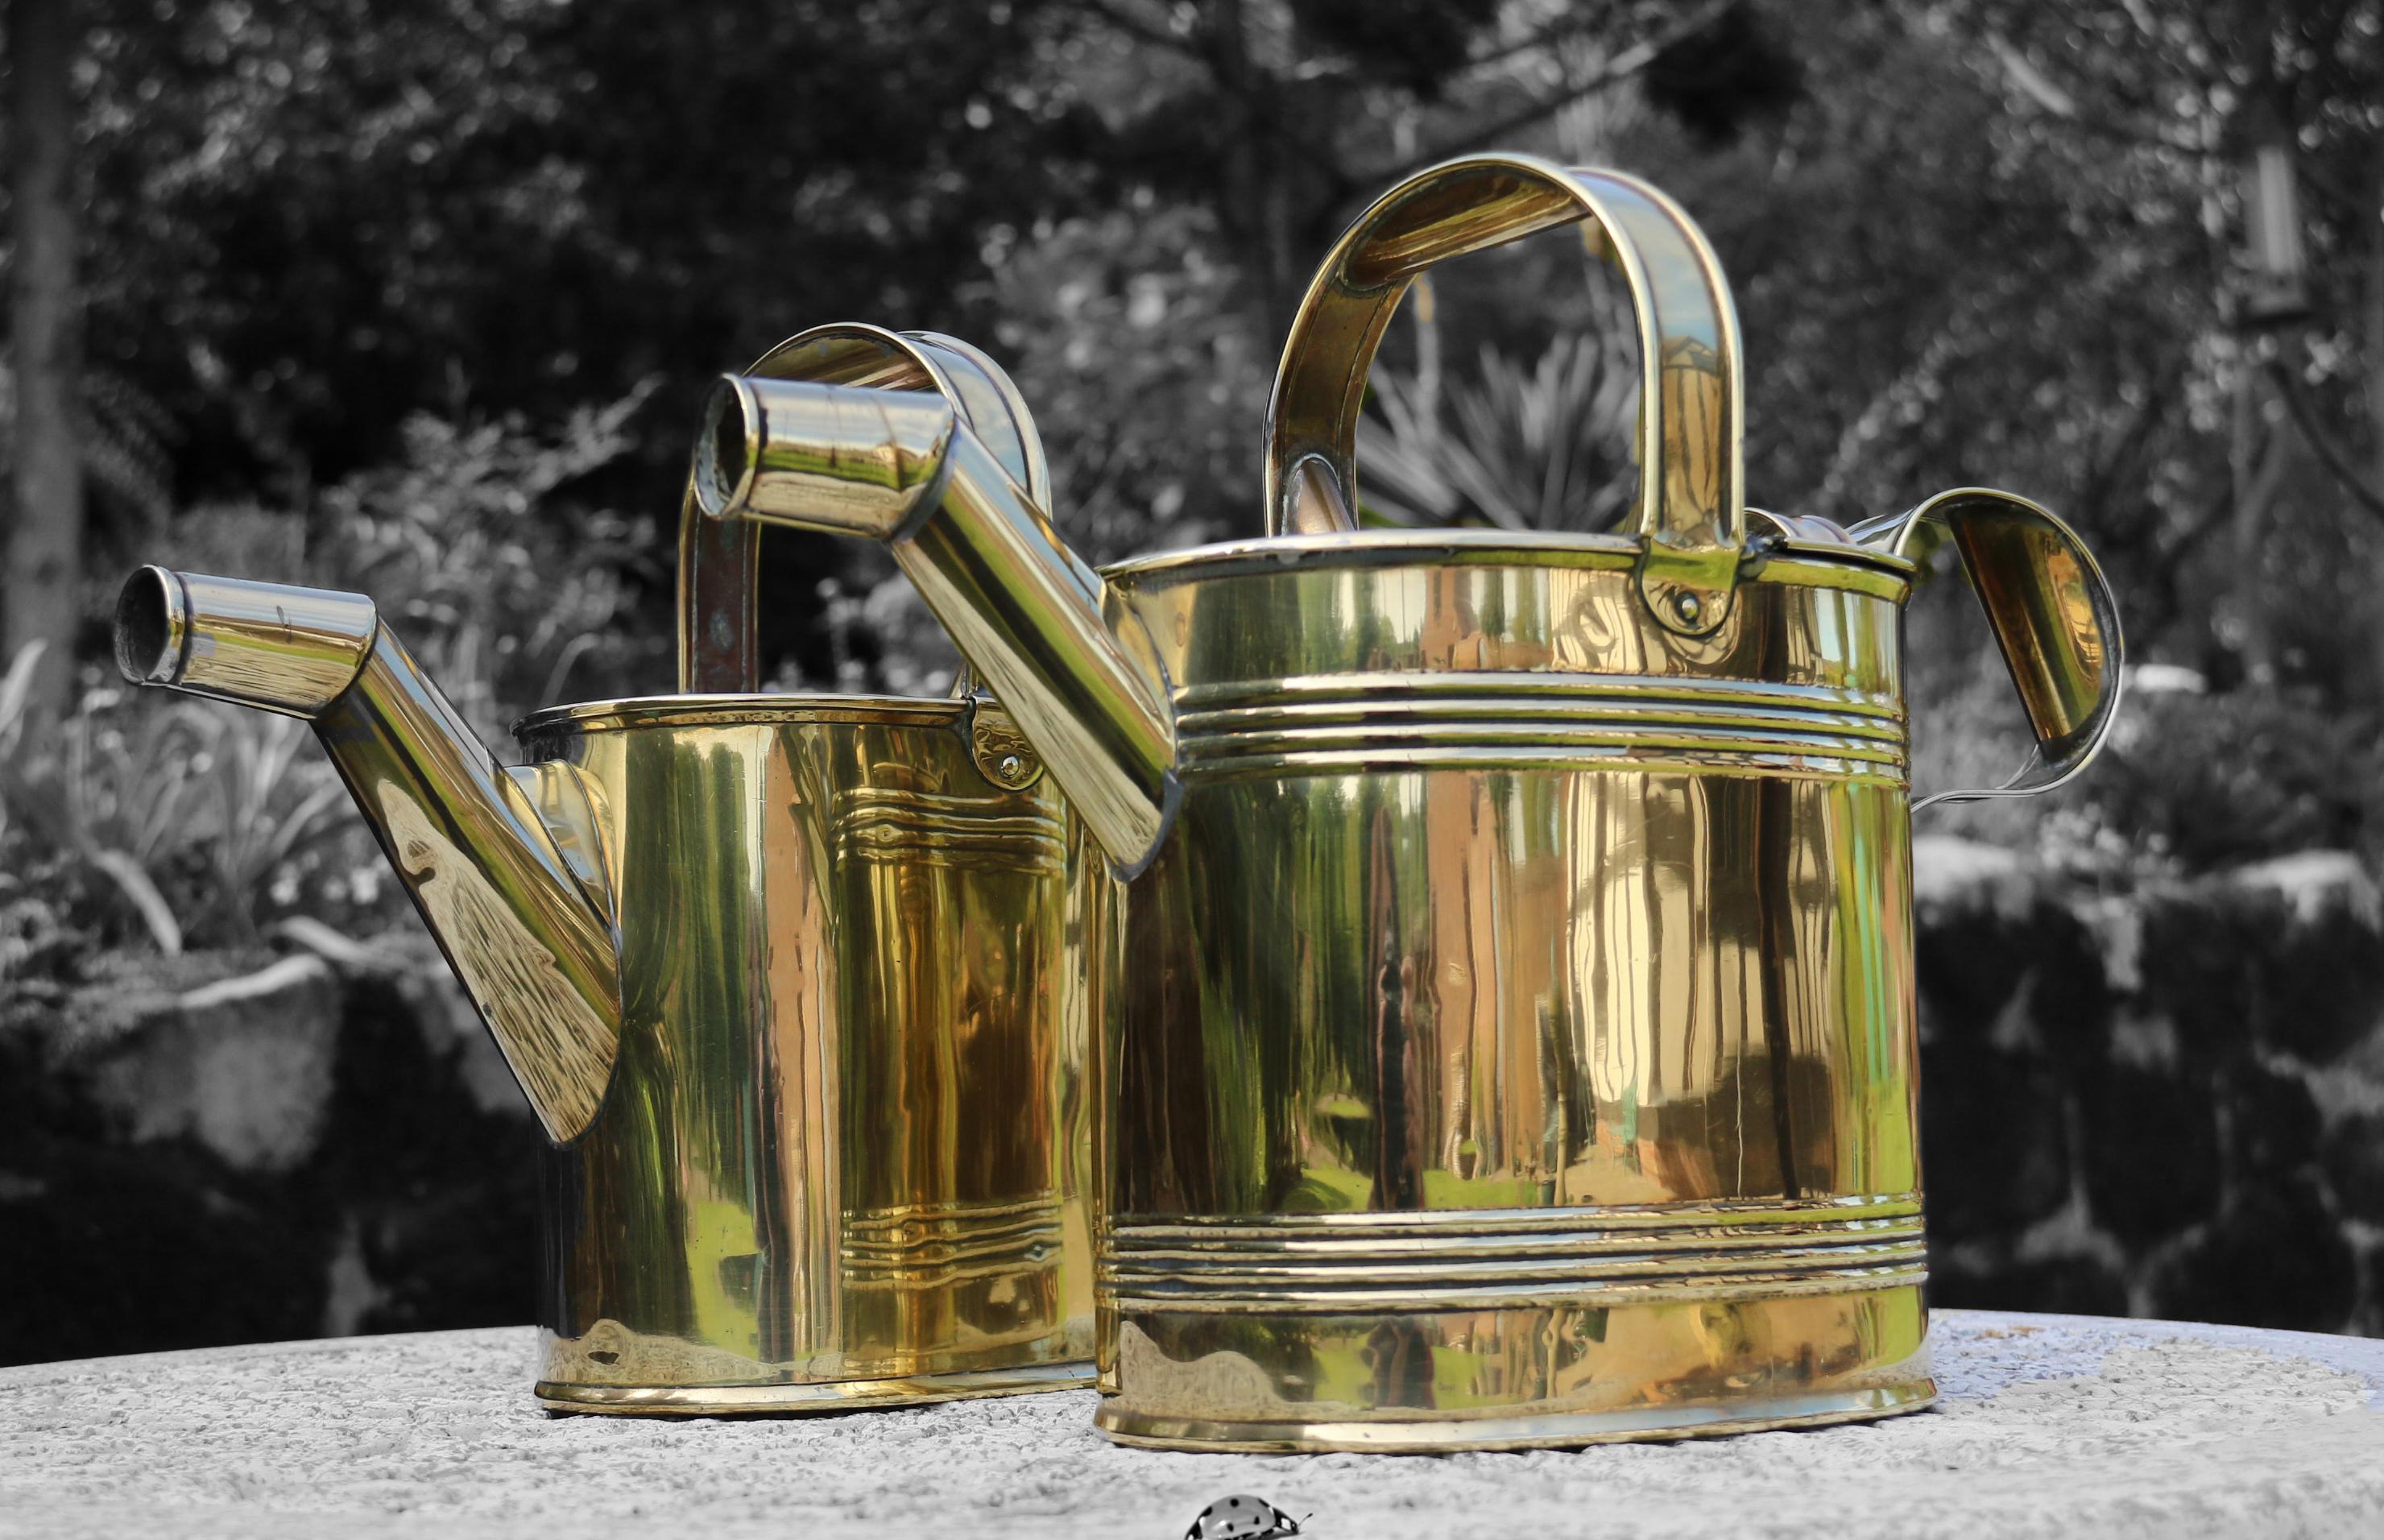 
This very decorative matched pair of country house type brass watering cans, one is a five pint and the other is a six pint, are both beautifully made in solid sheet brass. The larger one has a maker stamp on its underside for Williamson and Sons